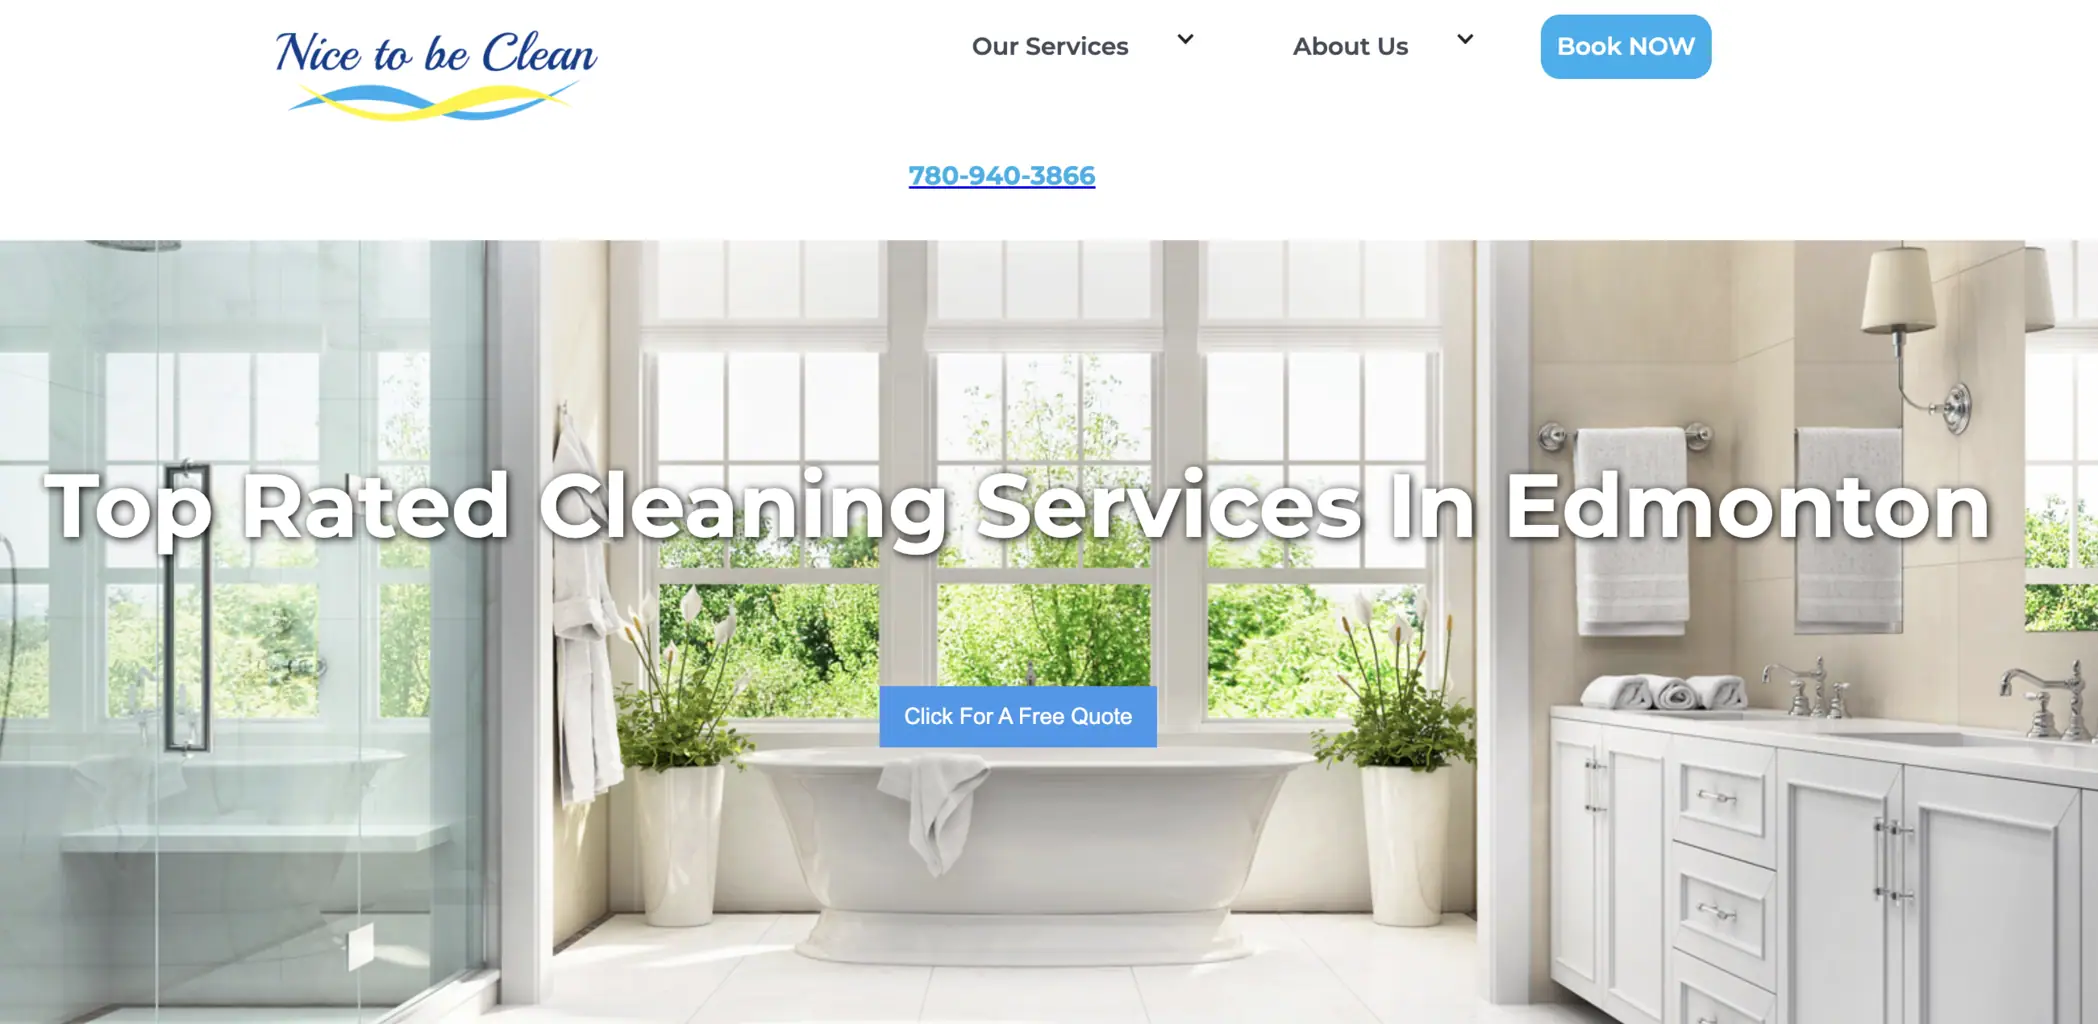 nice to be clean website design by business all in one marketing solutions